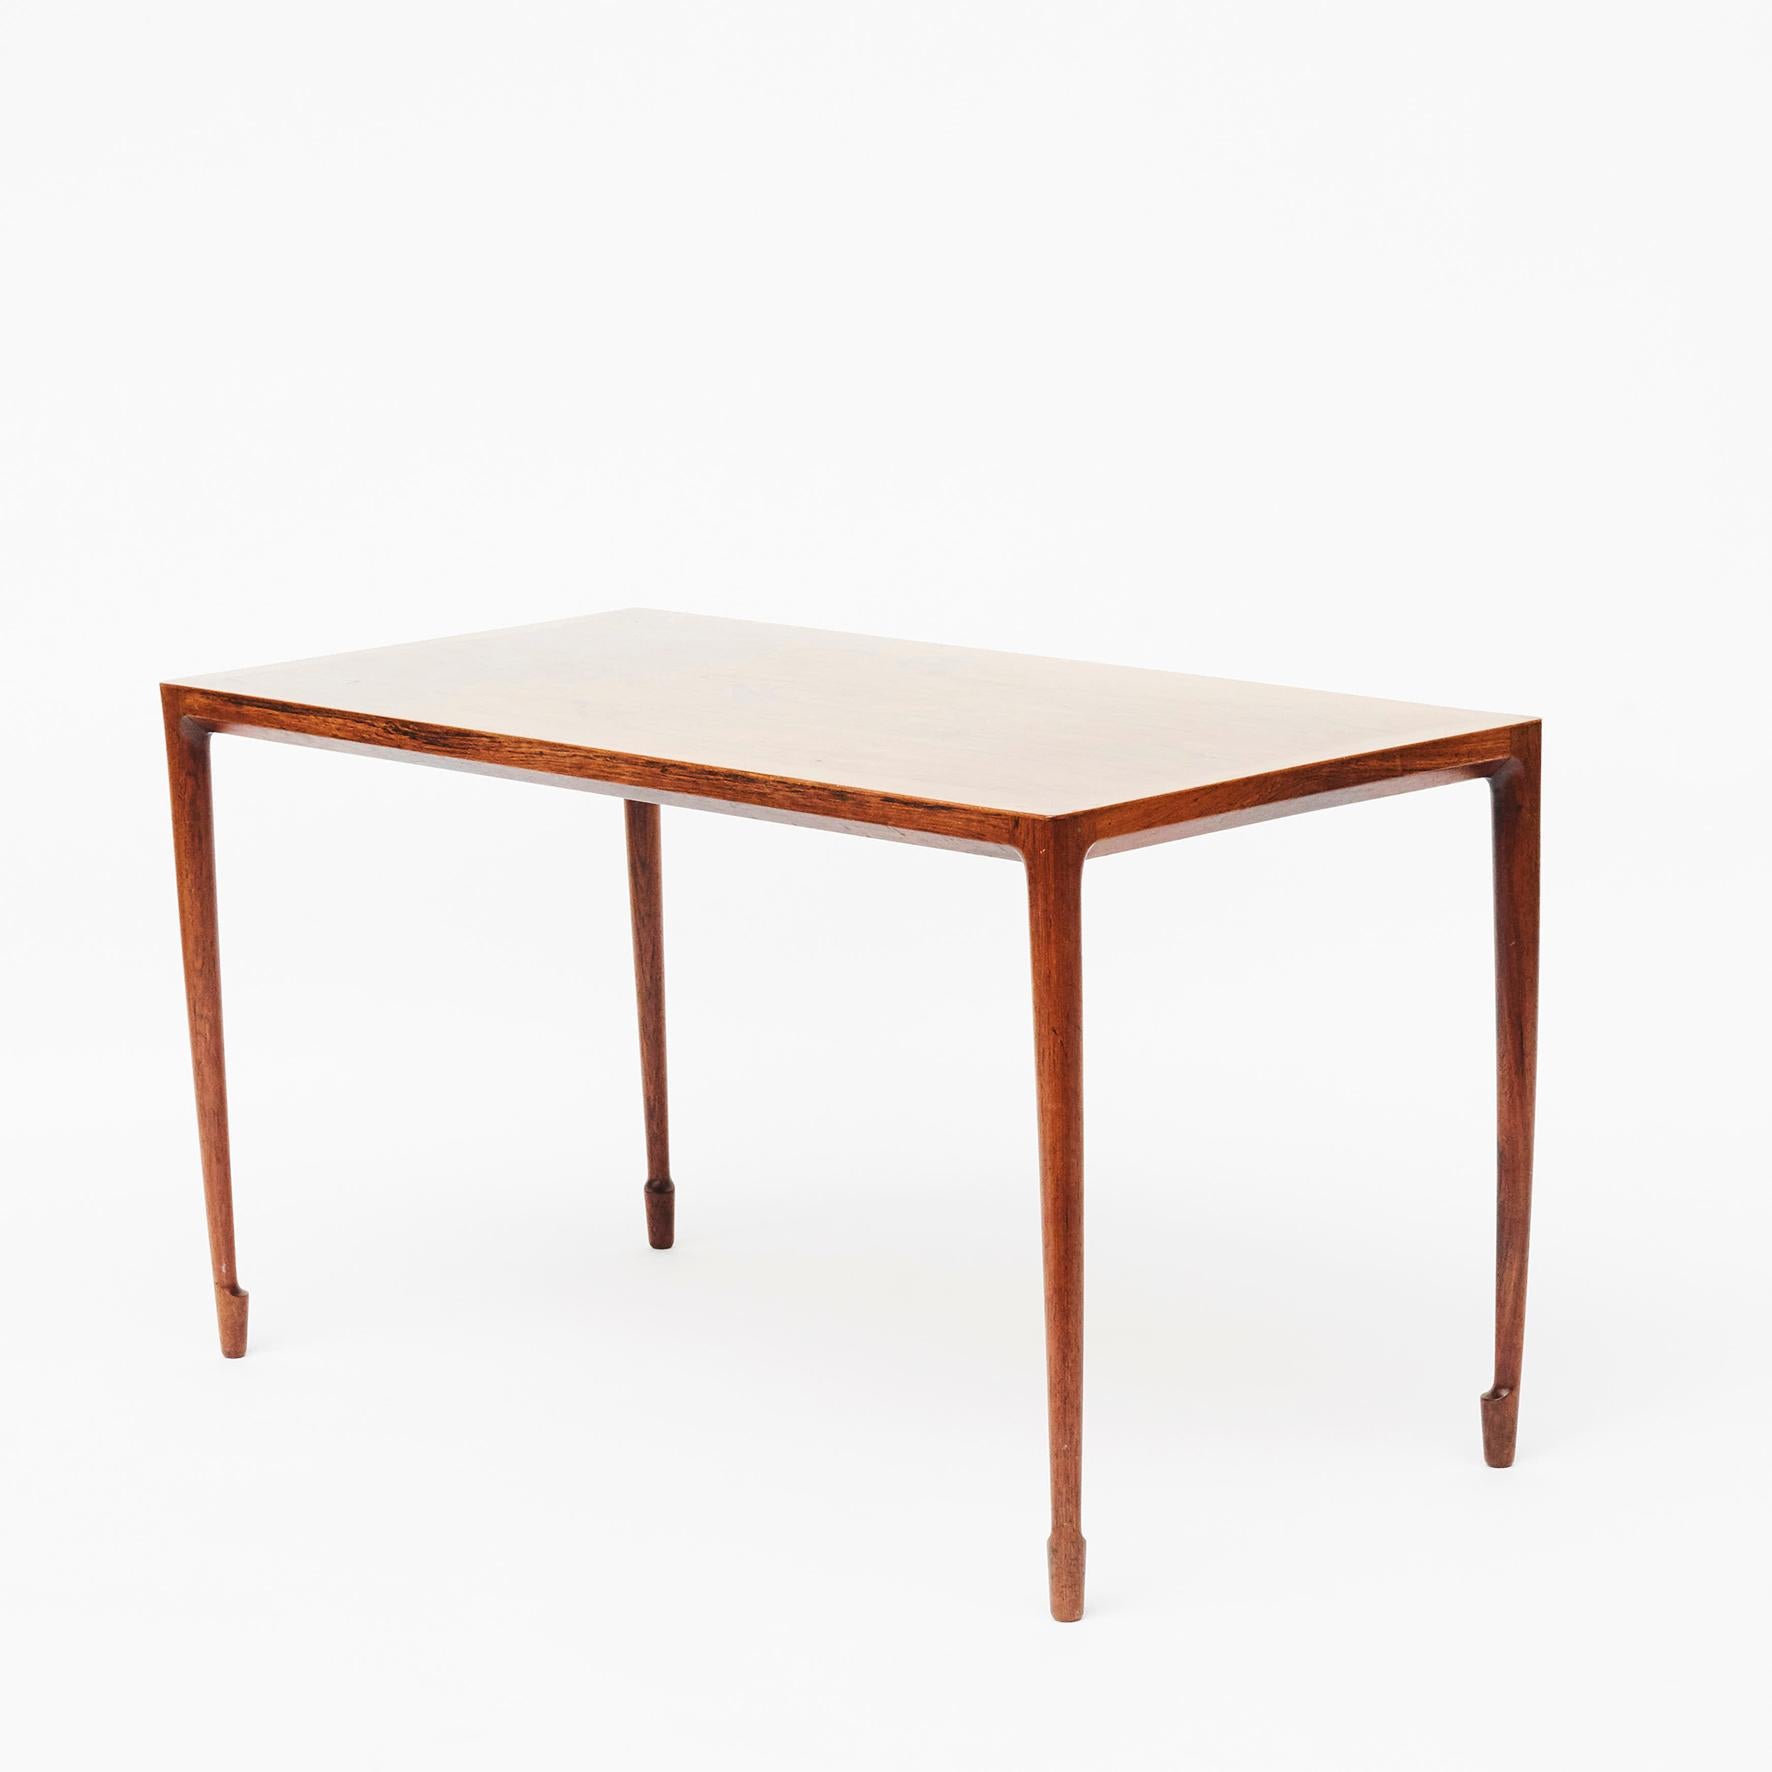 Coffee table in rosewood by danish architect Bernt Petersen.
Produced by Wørts, 1958.
Original untouched and in good condition.